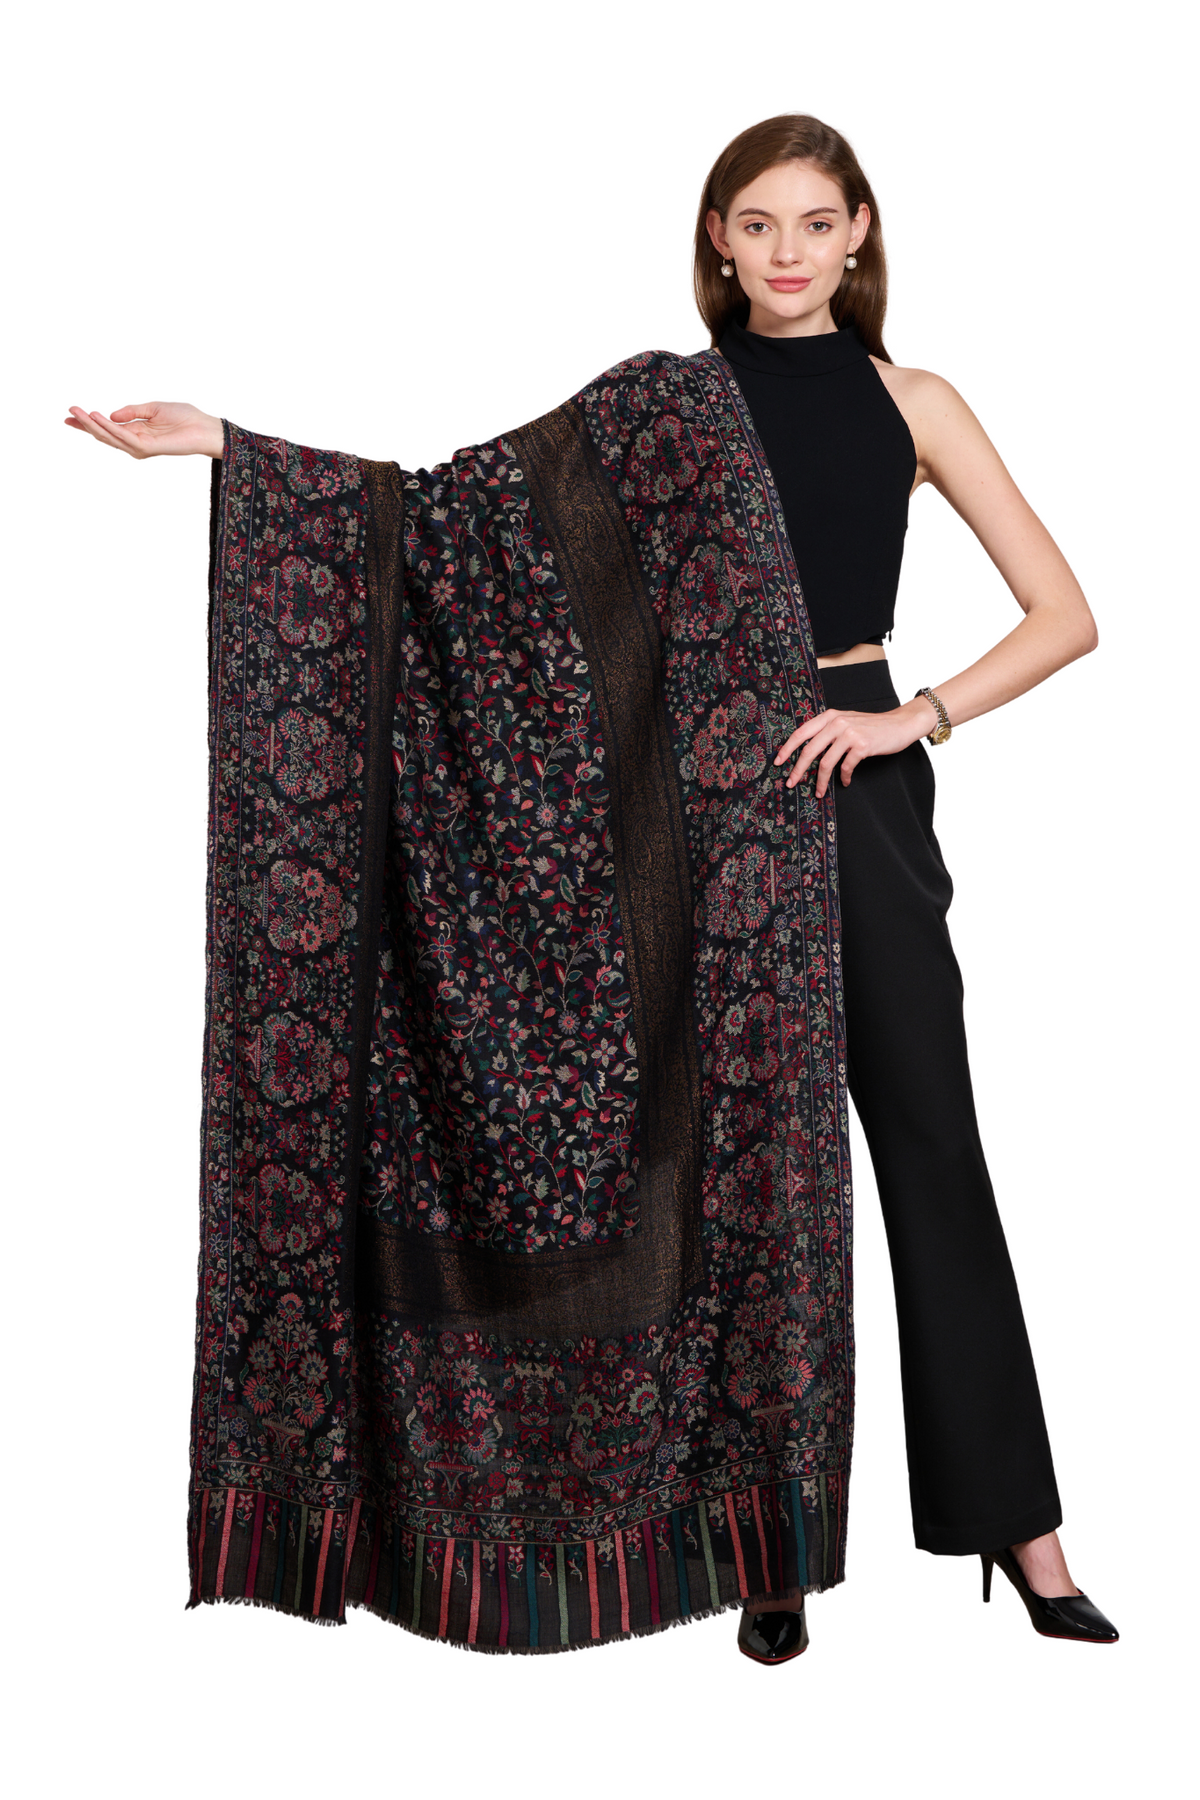 Exclusive Pashmina Kaani Shawl for Him or Her (Unisex Stole )